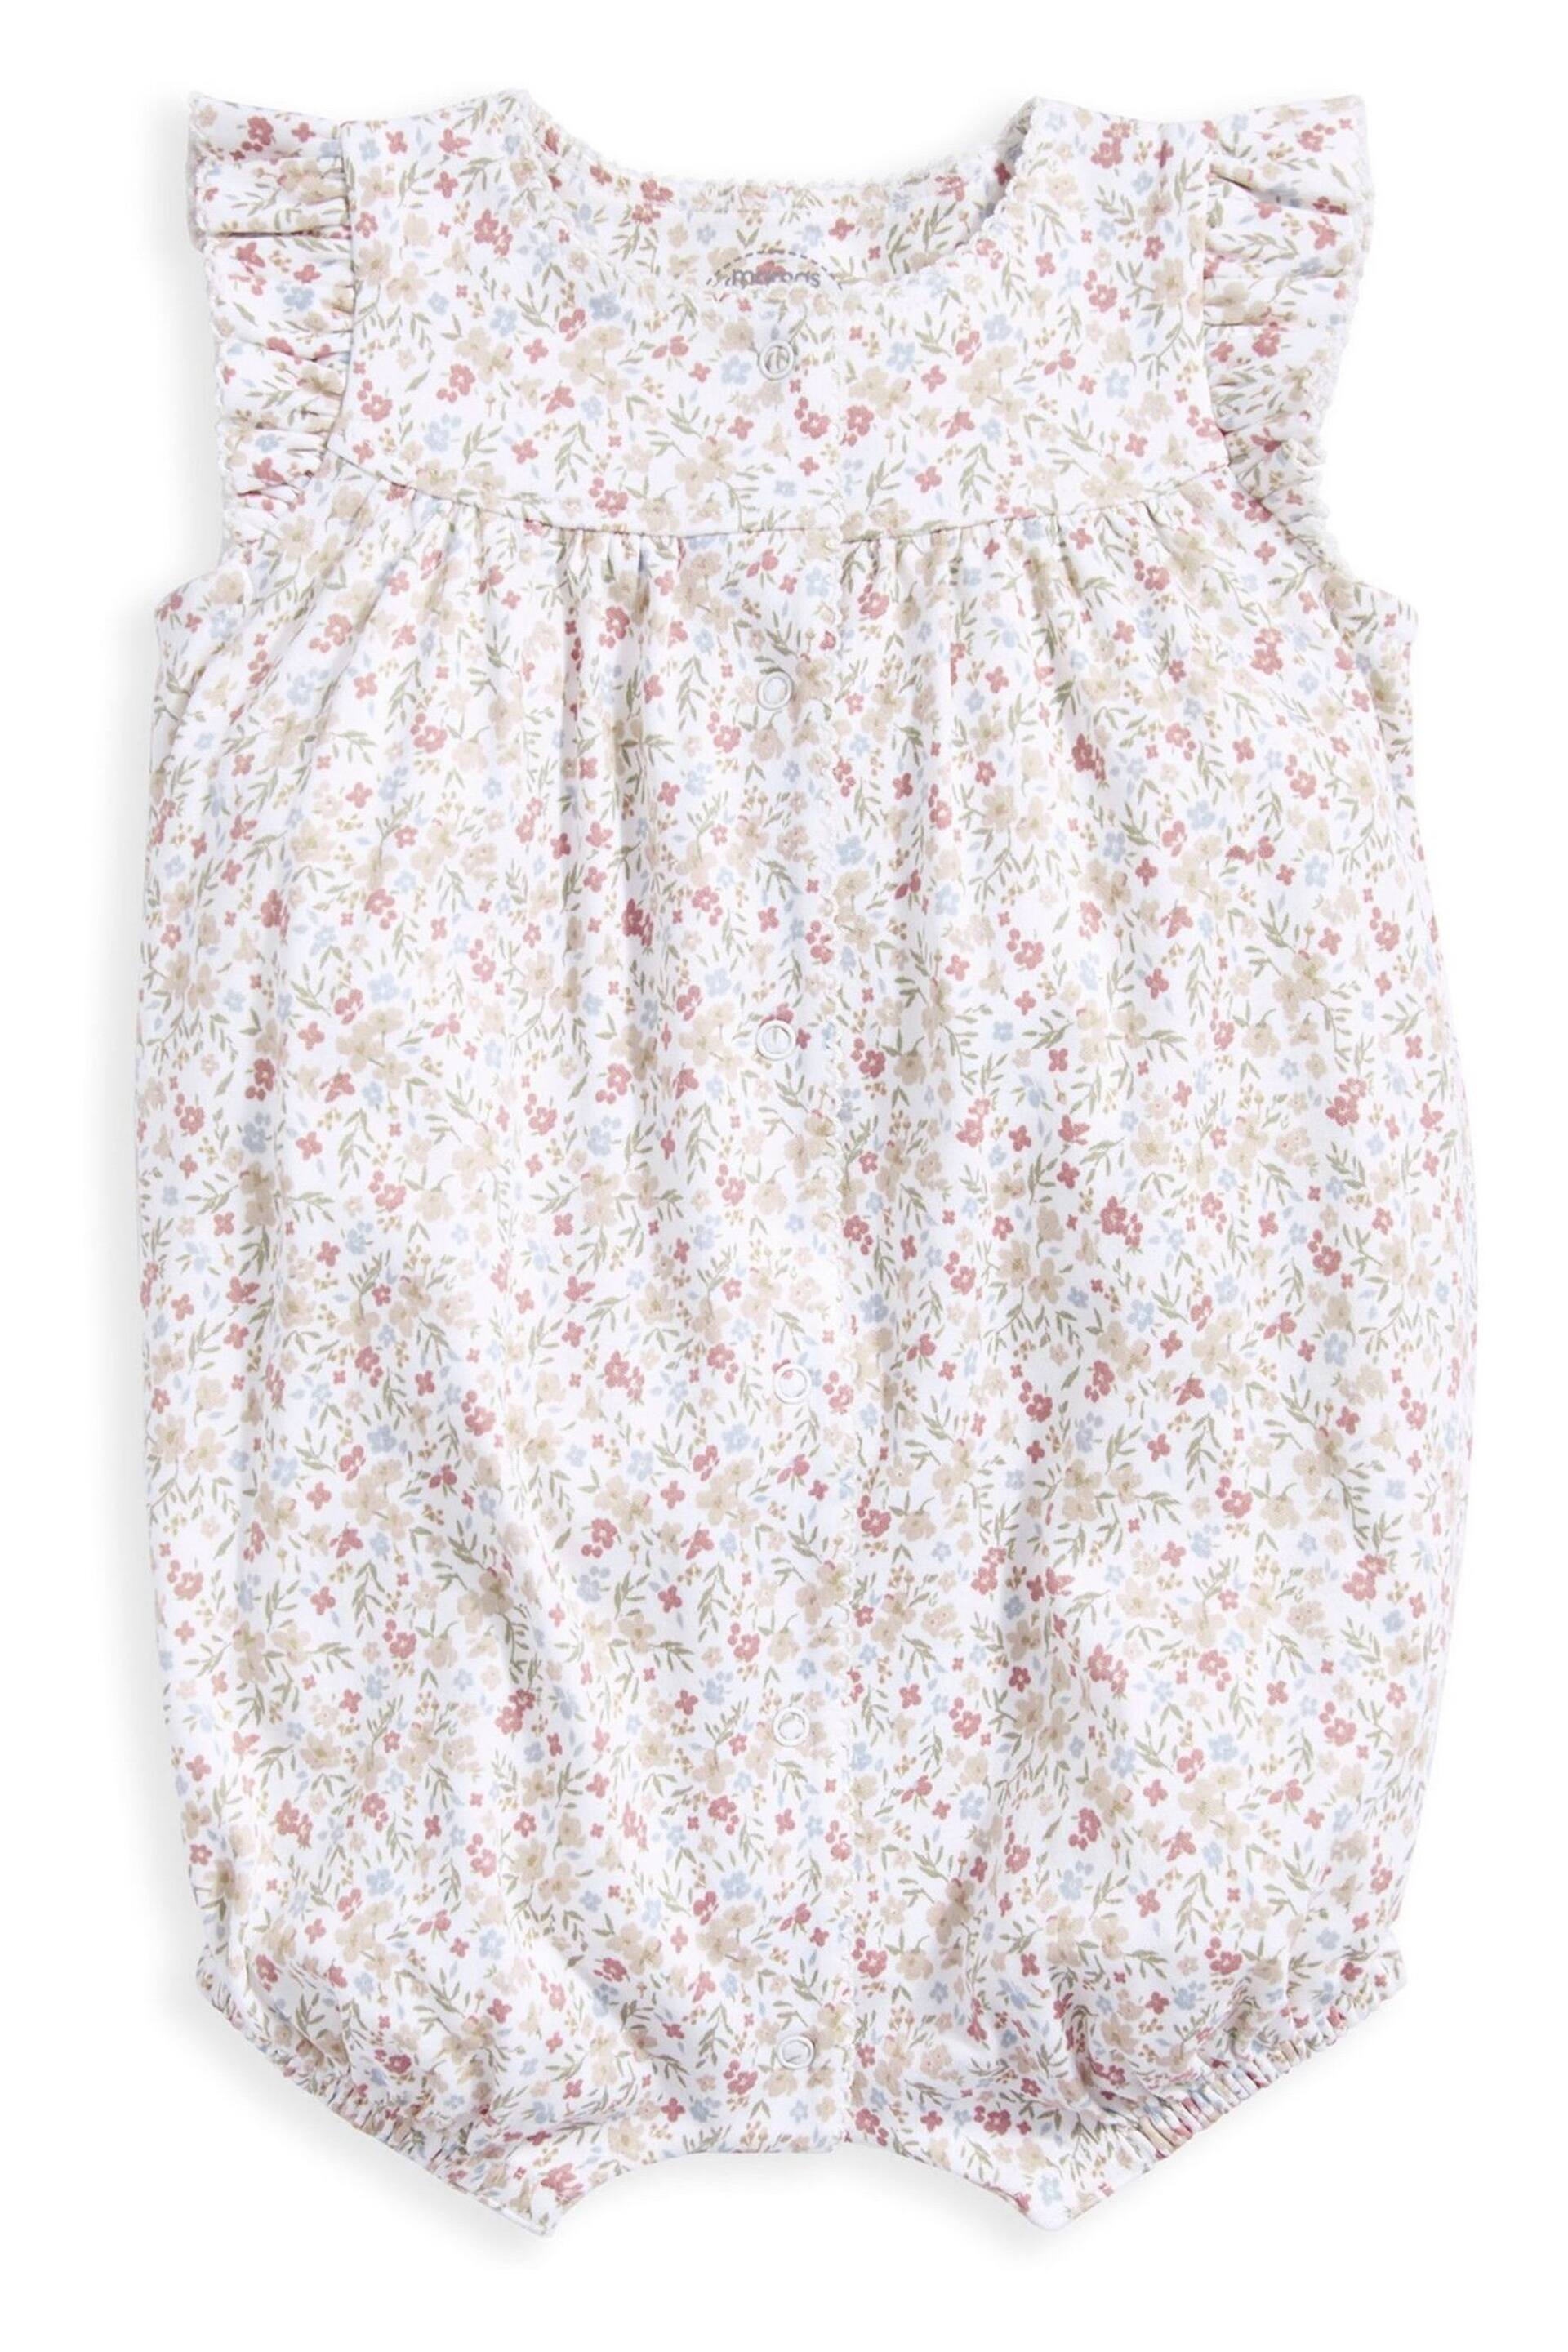 Mamas & Papas Pink Ditsy Floral Jersey Shortie Romper - Image 2 of 3